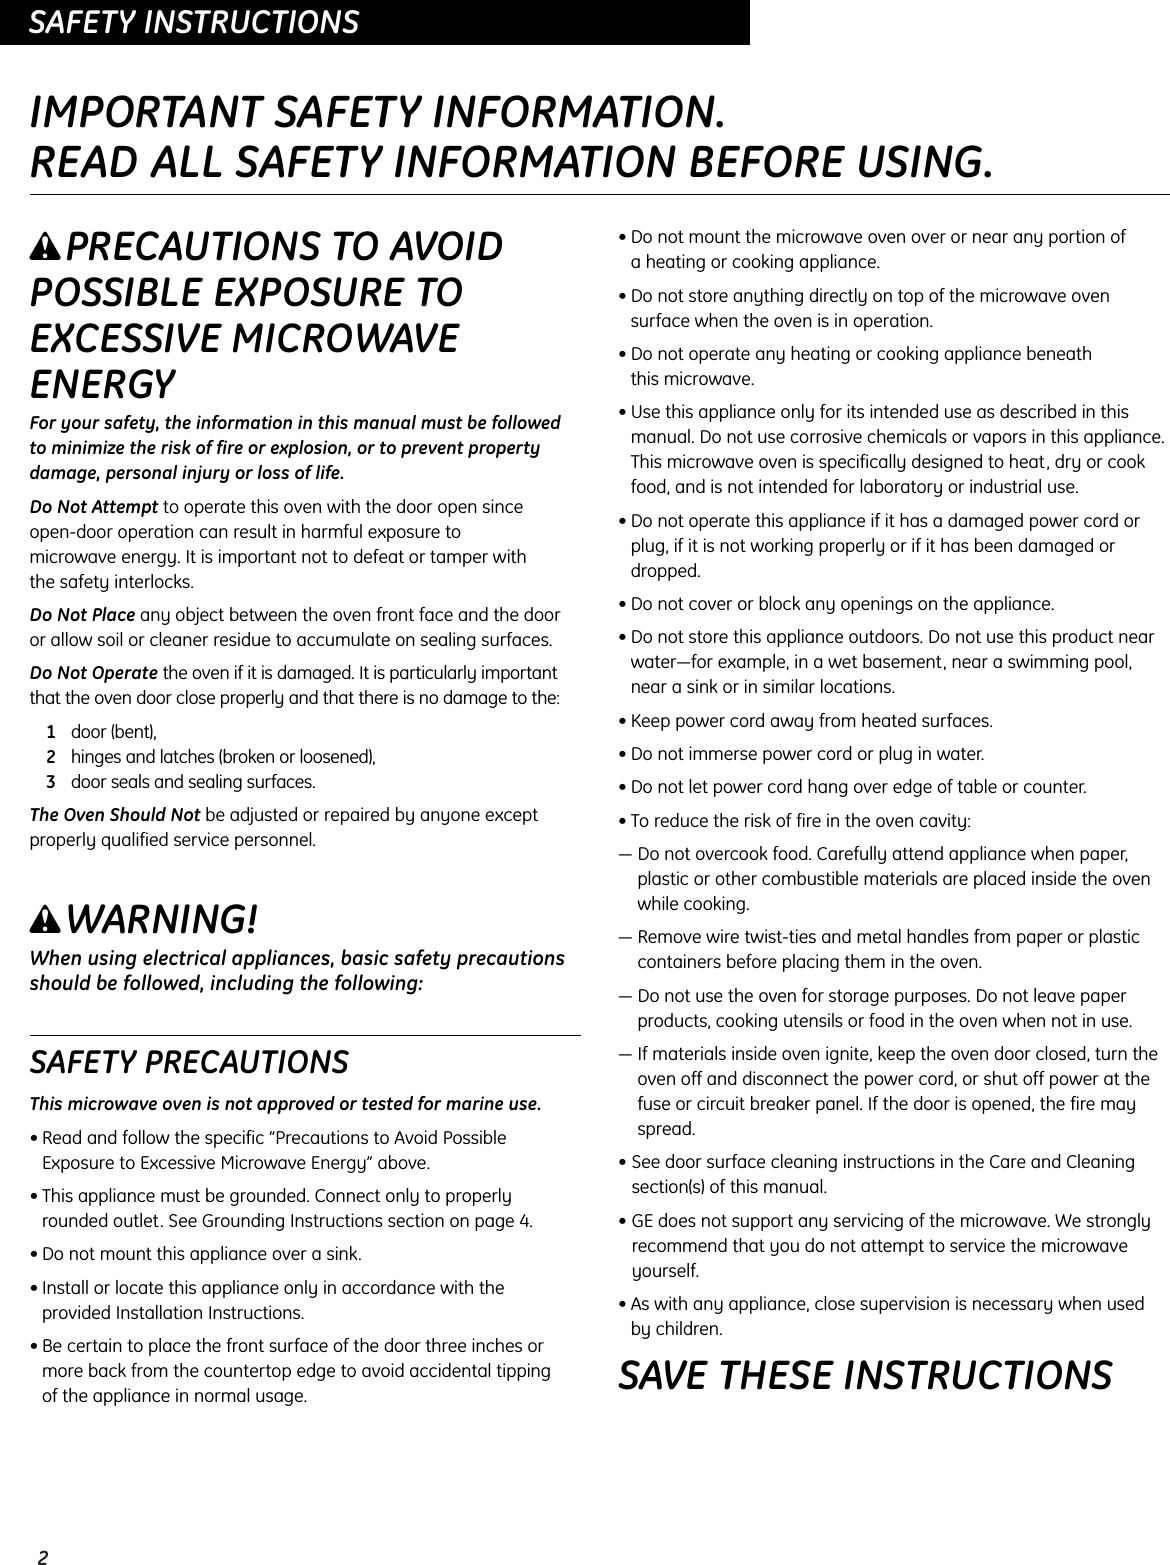 2OPERATING INSTRUCTIONSSAFETY INSTRUCTIONSIMPORTANT SAFETY INFORMATION.READ ALL SAFETY INFORMATION BEFORE USING.wPRECAUTIONS TO AVOIDPOSSIBLE EXPOSURE TOEXCESSIVE MICROWAVEENERGYFor your safety, the information in this manual must be followed to minimize the risk of fire or explosion, or to prevent propertydamage, personal injury or loss of life.Do Not Attempt to operate this oven with the door open since open-door operation can result in harmful exposure to microwave energy. It is important not to defeat or tamper with the safety interlocks.Do Not Place any object between the oven front face and the door or allow soil or cleaner residue to accumulate on sealing surfaces.Do Not Operate the oven if it is damaged. It is particularly importantthat the oven door close properly and that there is no damage to the:1door (bent),2hinges and latches (broken or loosened),3door seals and sealing surfaces.The Oven Should Not be adjusted or repaired by anyone exceptproperly qualified service personnel.wWARNING!When using electrical appliances, basic safety precautionsshould be followed, including the following:SAFETY PRECAUTIONSThis microwave oven is not approved or tested for marine use.• Read and follow the specific “Precautions to Avoid PossibleExposure to Excessive Microwave Energy” above.• This appliance must be grounded. Connect only to properlyrounded outlet. See Grounding Instructions section on page 4.• Do not mount this appliance over a sink. • Install or locate this appliance only in accordance with the provided Installation Instructions.• Be certain to place the front surface of the door three inches ormore back from the countertop edge to avoid accidental tipping of the appliance in normal usage.• Do not mount the microwave oven over or near any portion of a heating or cooking appliance.• Do not store anything directly on top of the microwave ovensurface when the oven is in operation.• Do not operate any heating or cooking appliance beneath this microwave.• Use this appliance only for its intended use as described in thismanual. Do not use corrosive chemicals or vapors in this appliance.This microwave oven is specifically designed to heat, dry or cookfood, and is not intended for laboratory or industrial use.• Do not operate this appliance if it has a damaged power cord orplug, if it is not working properly or if it has been damaged ordropped.• Do not cover or block any openings on the appliance.• Do not store this appliance outdoors. Do not use this product nearwater—for example, in a wet basement, near a swimming pool,near a sink or in similar locations.• Keep power cord away from heated surfaces.• Do not immerse power cord or plug in water.• Do not let power cord hang over edge of table or counter.• To reduce the risk of fire in the oven cavity:— Do not overcook food. Carefully attend appliance when paper,plastic or other combustible materials are placed inside the ovenwhile cooking.— Remove wire twist-ties and metal handles from paper or plasticcontainers before placing them in the oven.— Do not use the oven for storage purposes. Do not leave paperproducts, cooking utensils or food in the oven when not in use.— If materials inside oven ignite, keep the oven door closed, turn theoven off and disconnect the power cord, or shut off power at thefuse or circuit breaker panel. If the door is opened, the fire mayspread.• See door surface cleaning instructions in the Care and Cleaningsection(s) of this manual.• GE does not support any servicing of the microwave. We stronglyrecommend that you do not attempt to service the microwaveyourself.• As with any appliance, close supervision is necessary when used by children.SAVE THESE INSTRUCTIONS